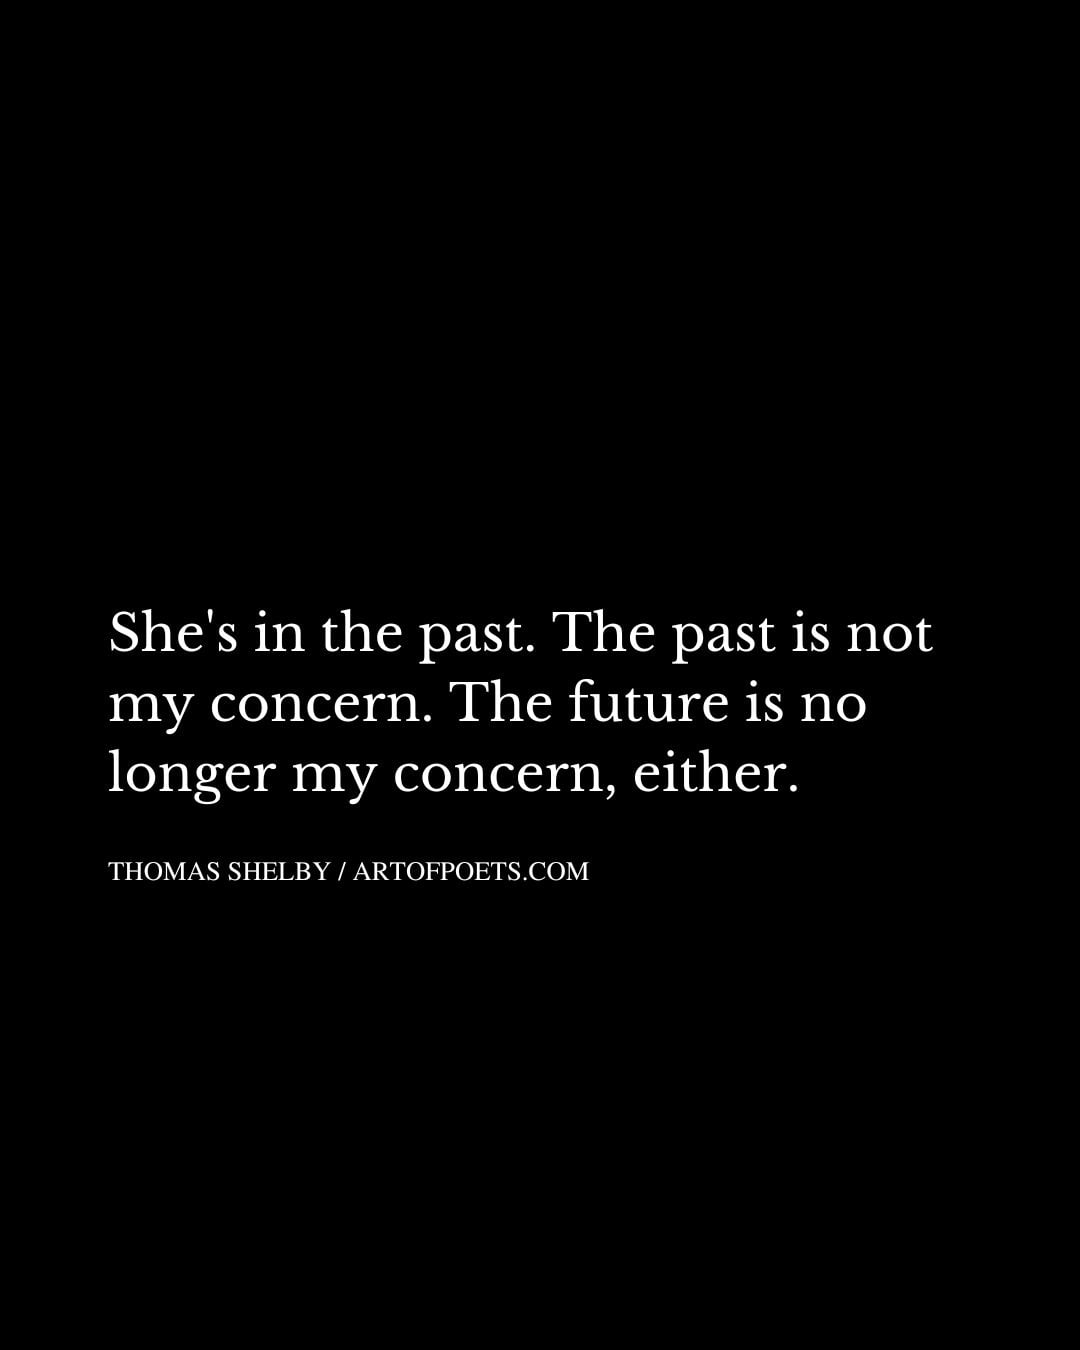 Shes in the past. The past is not my concern. The future is no longer my concern either